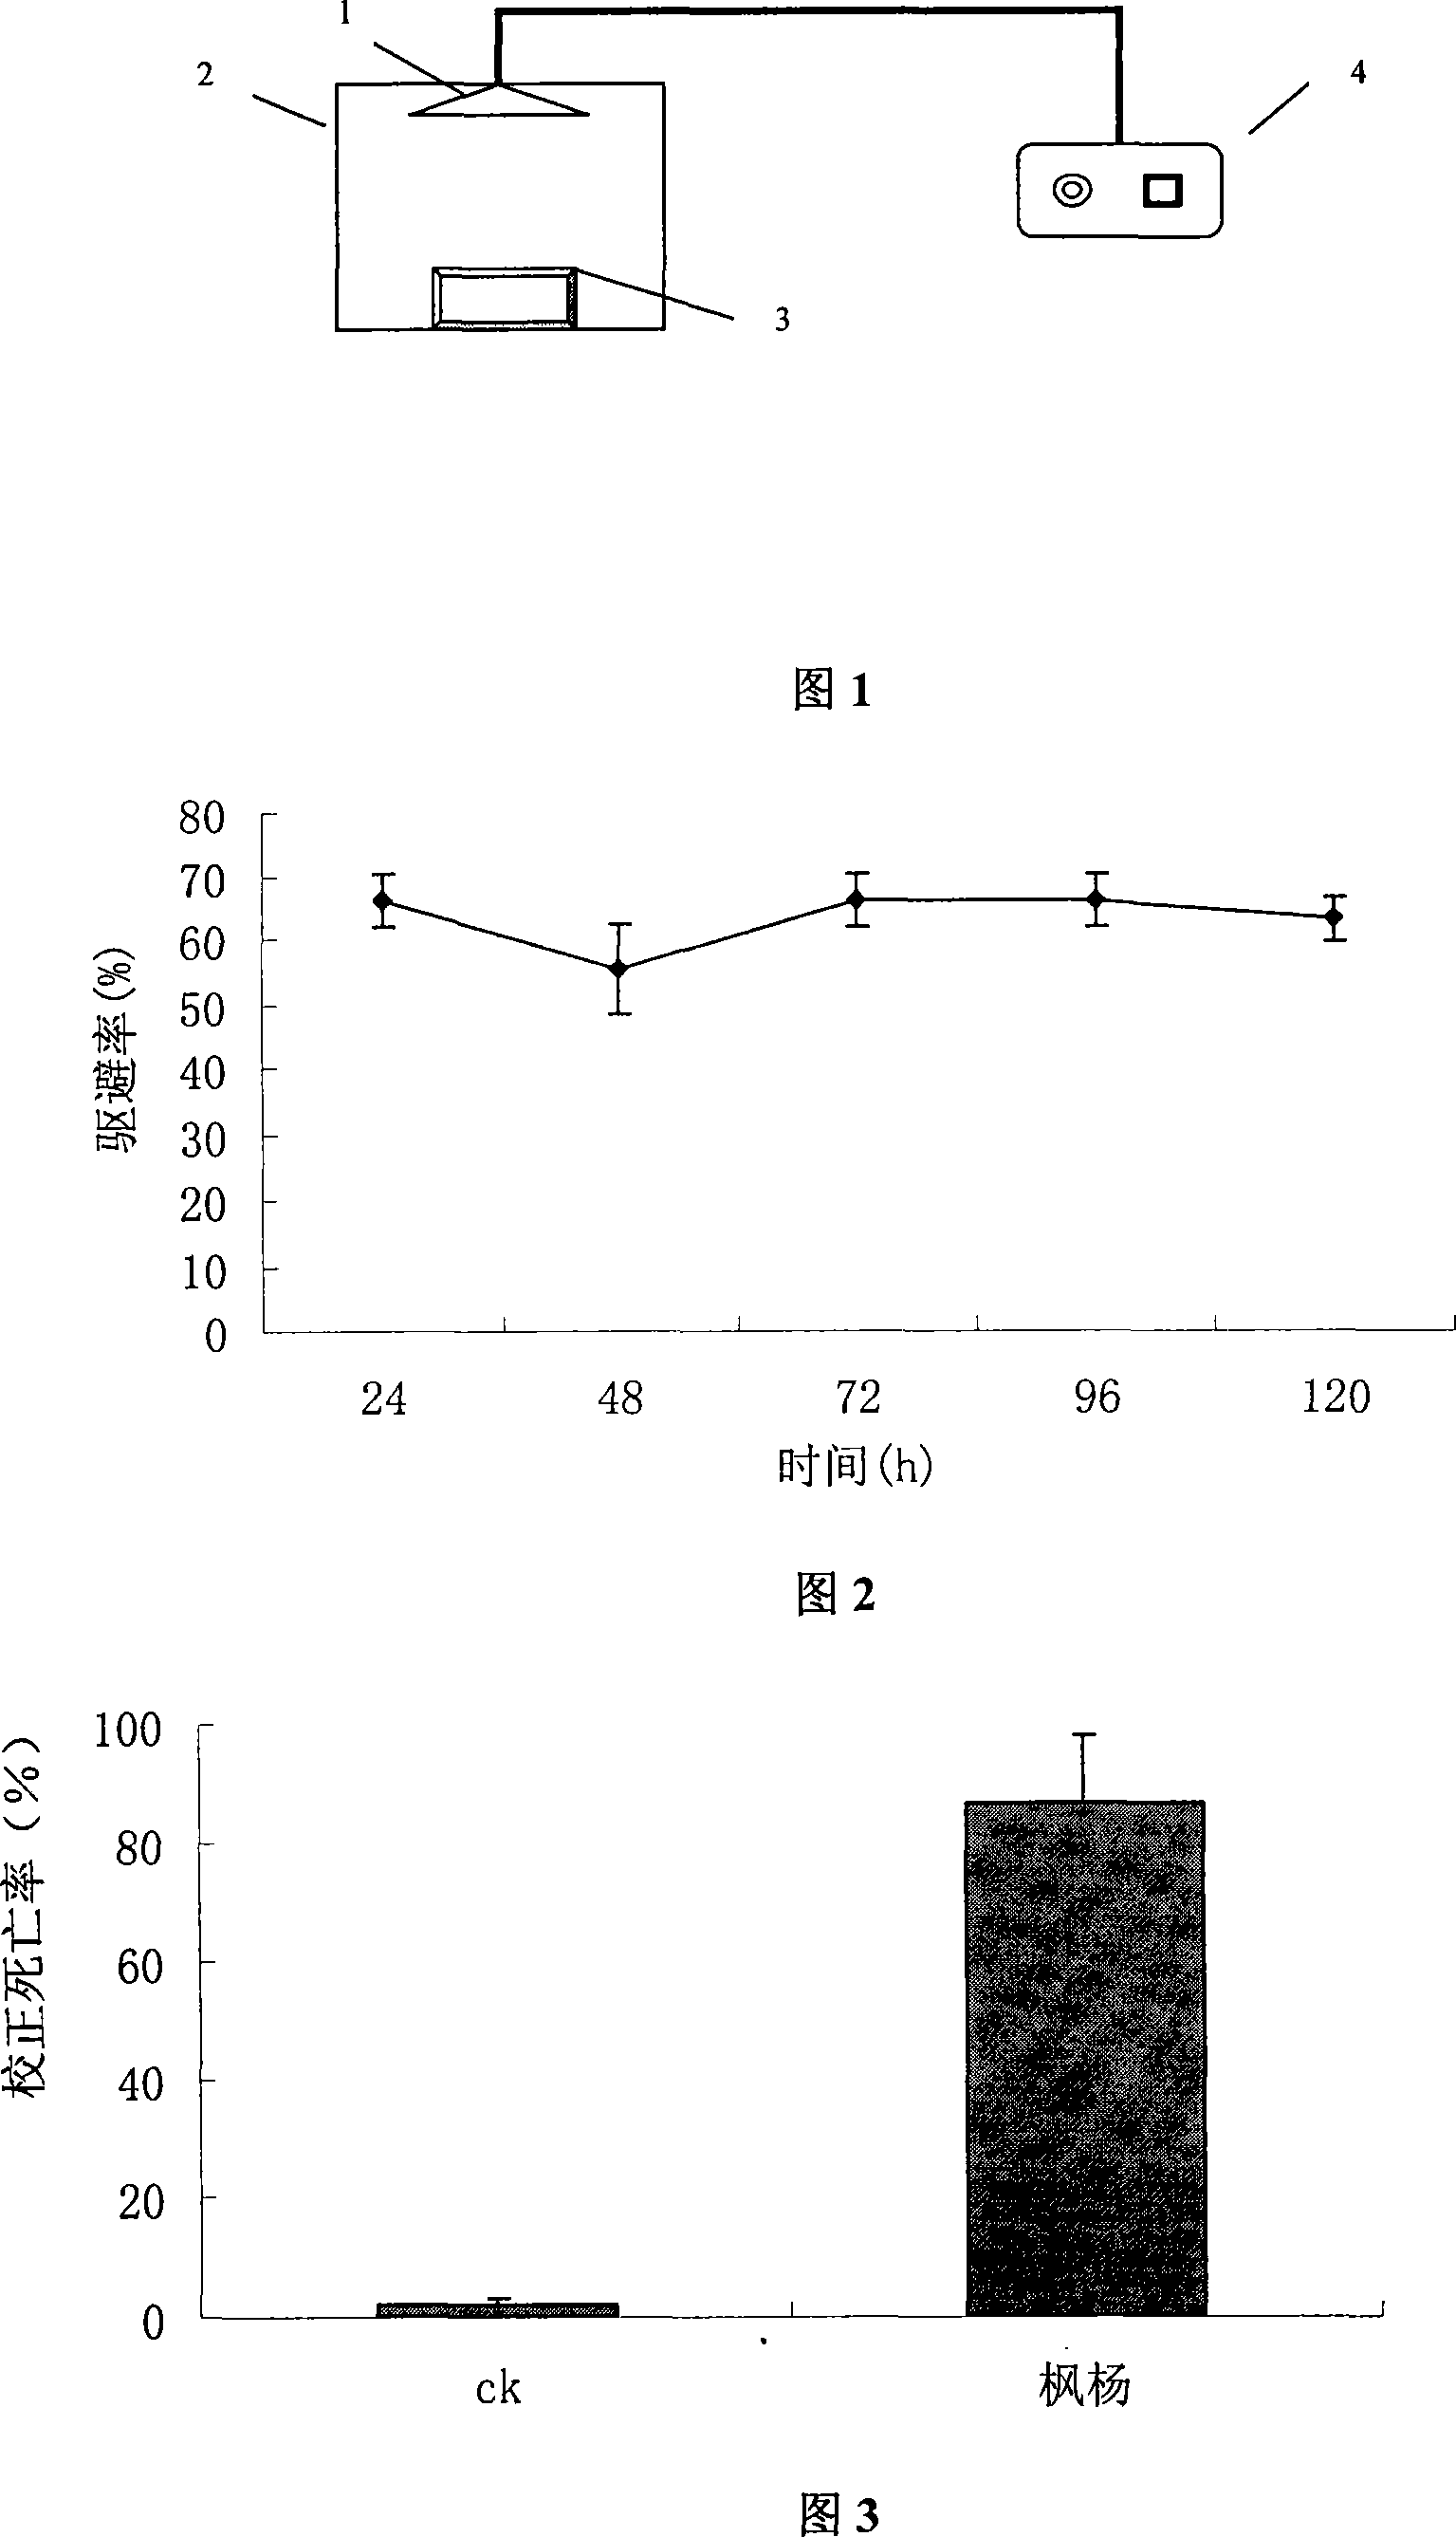 Method of non-chemical treatment for preventing and controlling insects of grain storage